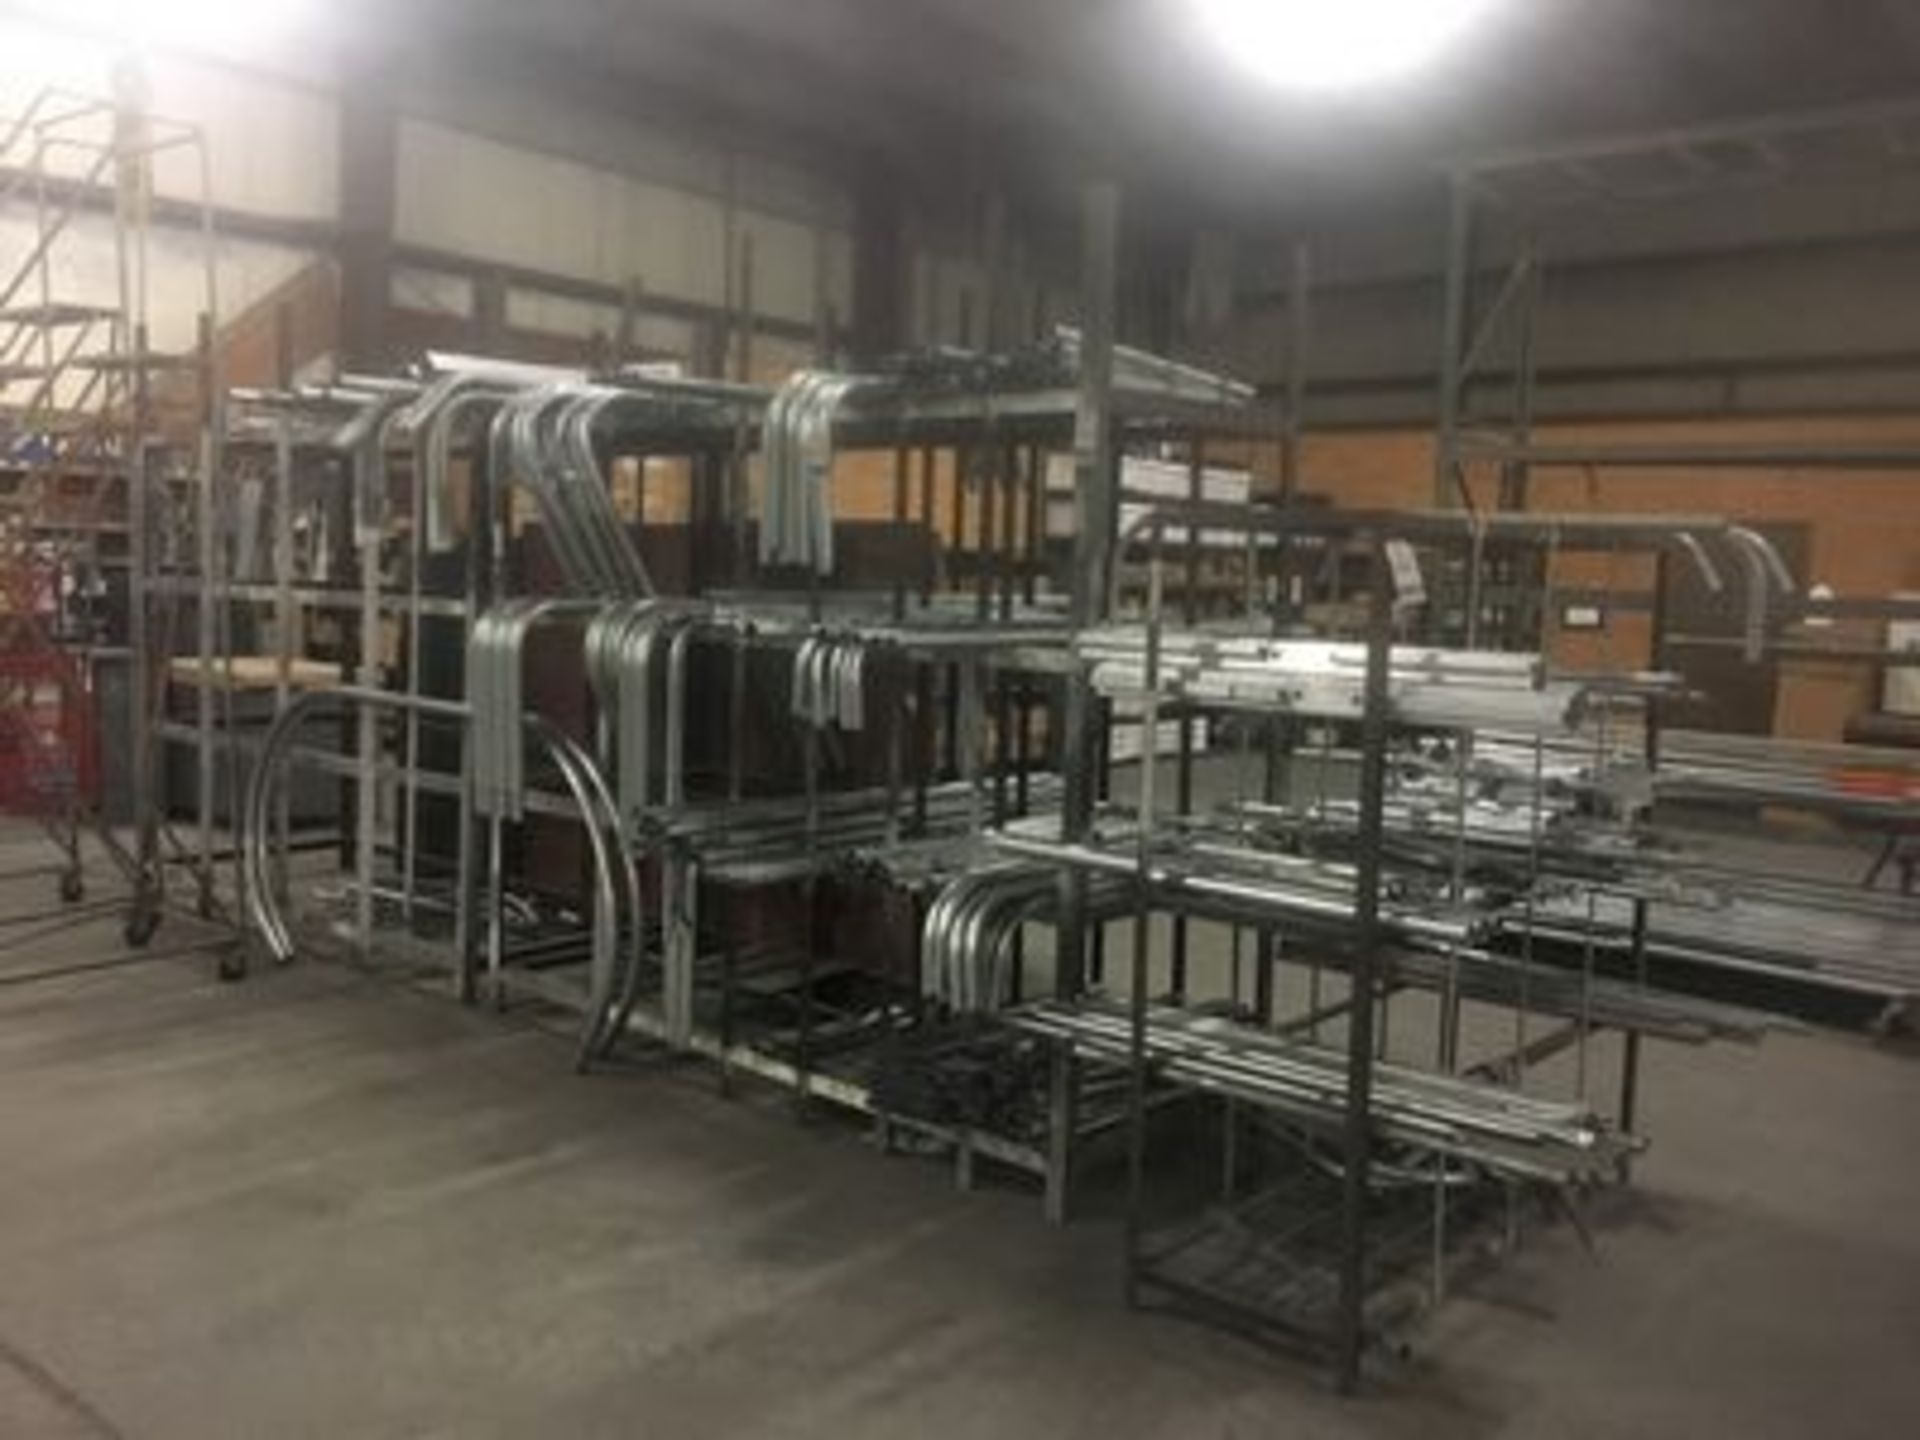 LOT OF ASS'T. CURVED METAL PIPING W/ METAL SHELVING